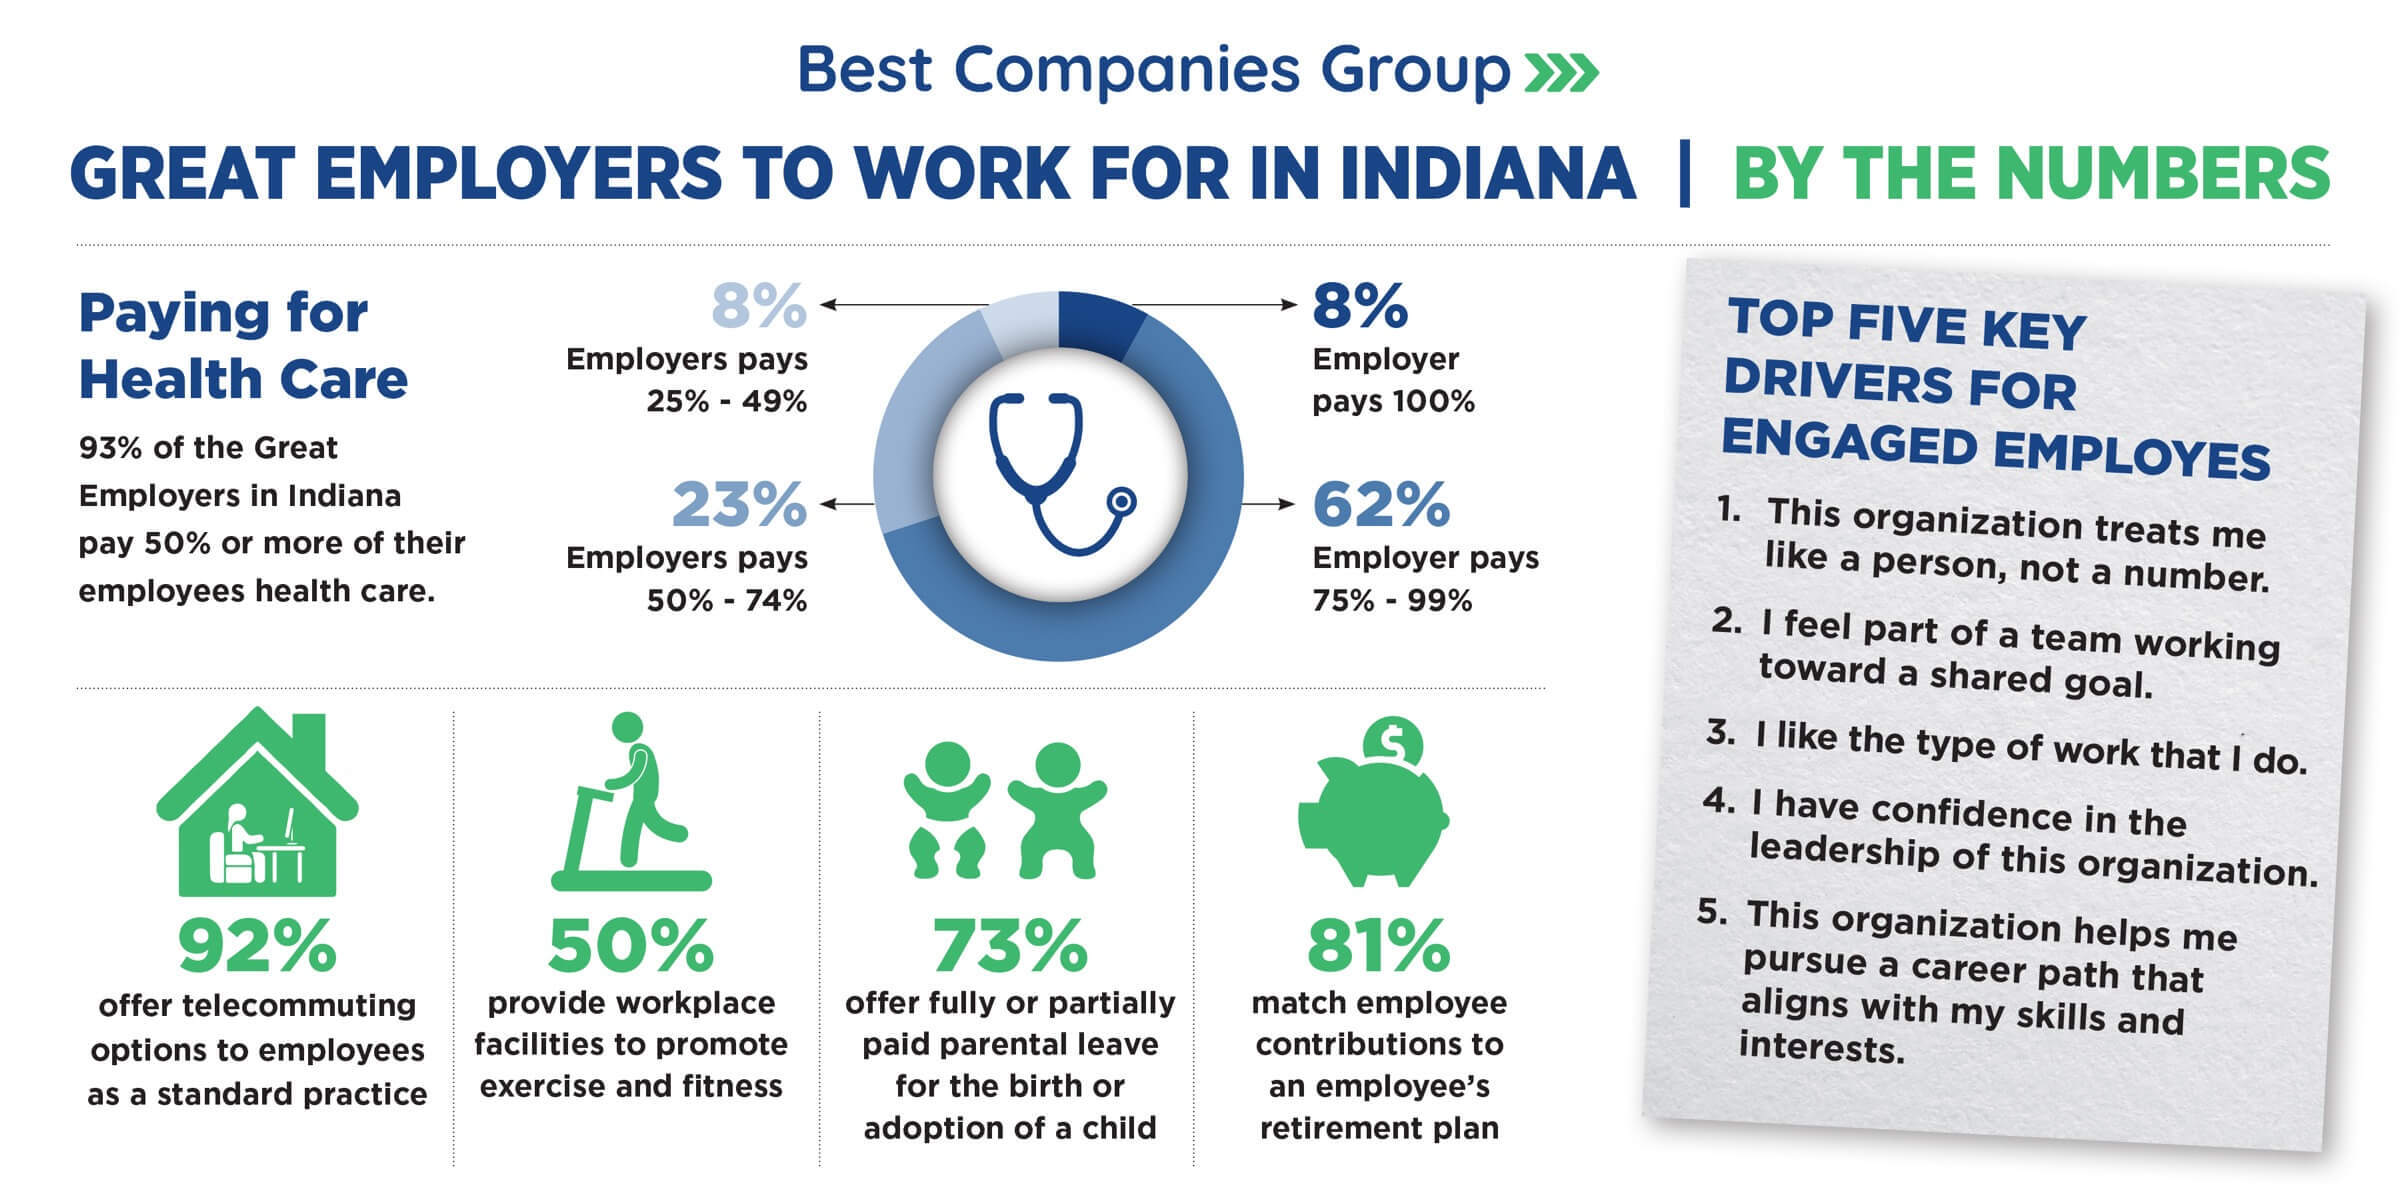 Best Companies to Work for in Indiana Winners